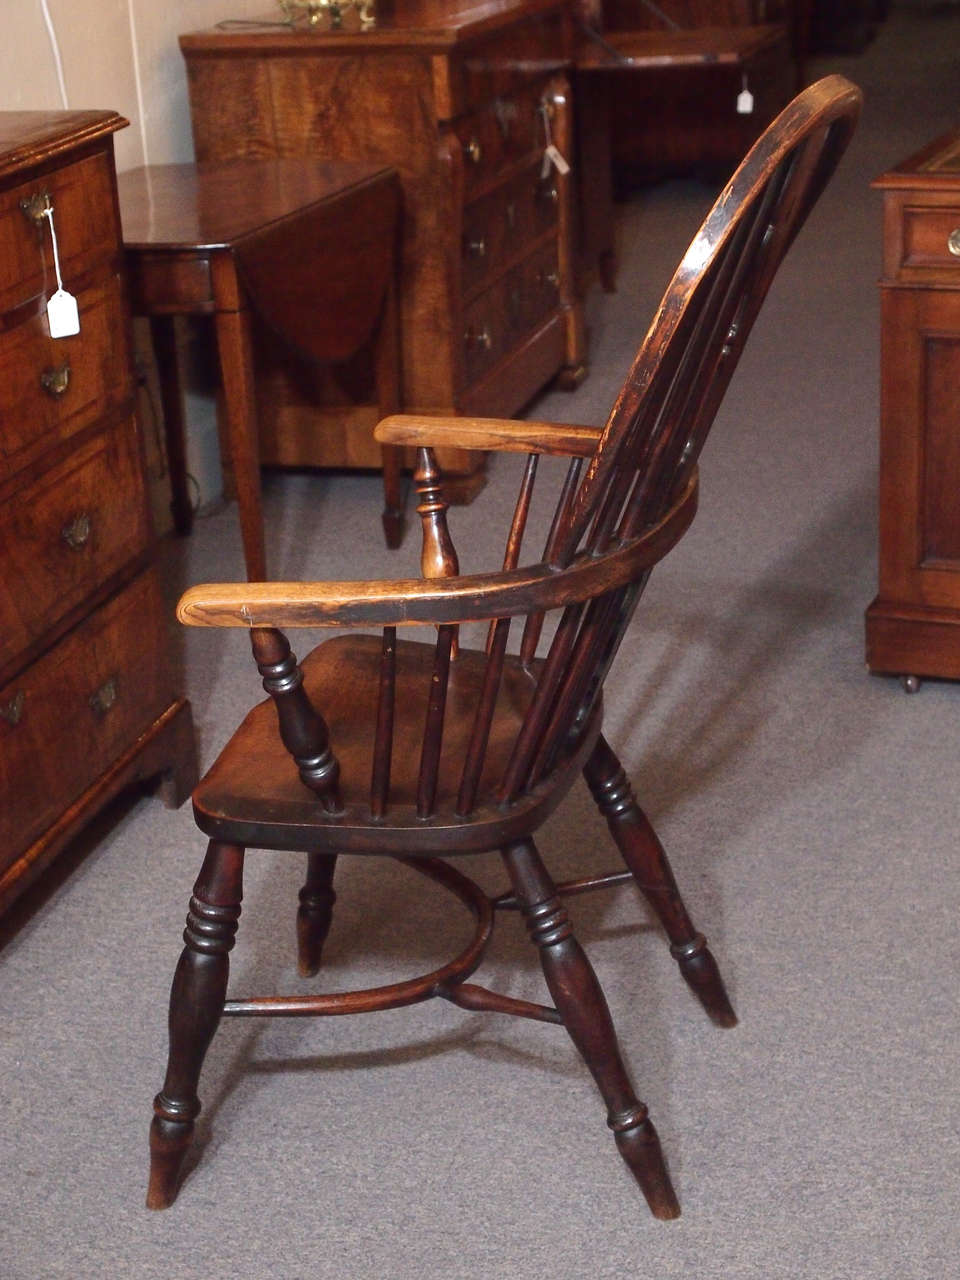 Elm Antique English elm and ash Windsor chair with crinoline stretcher.